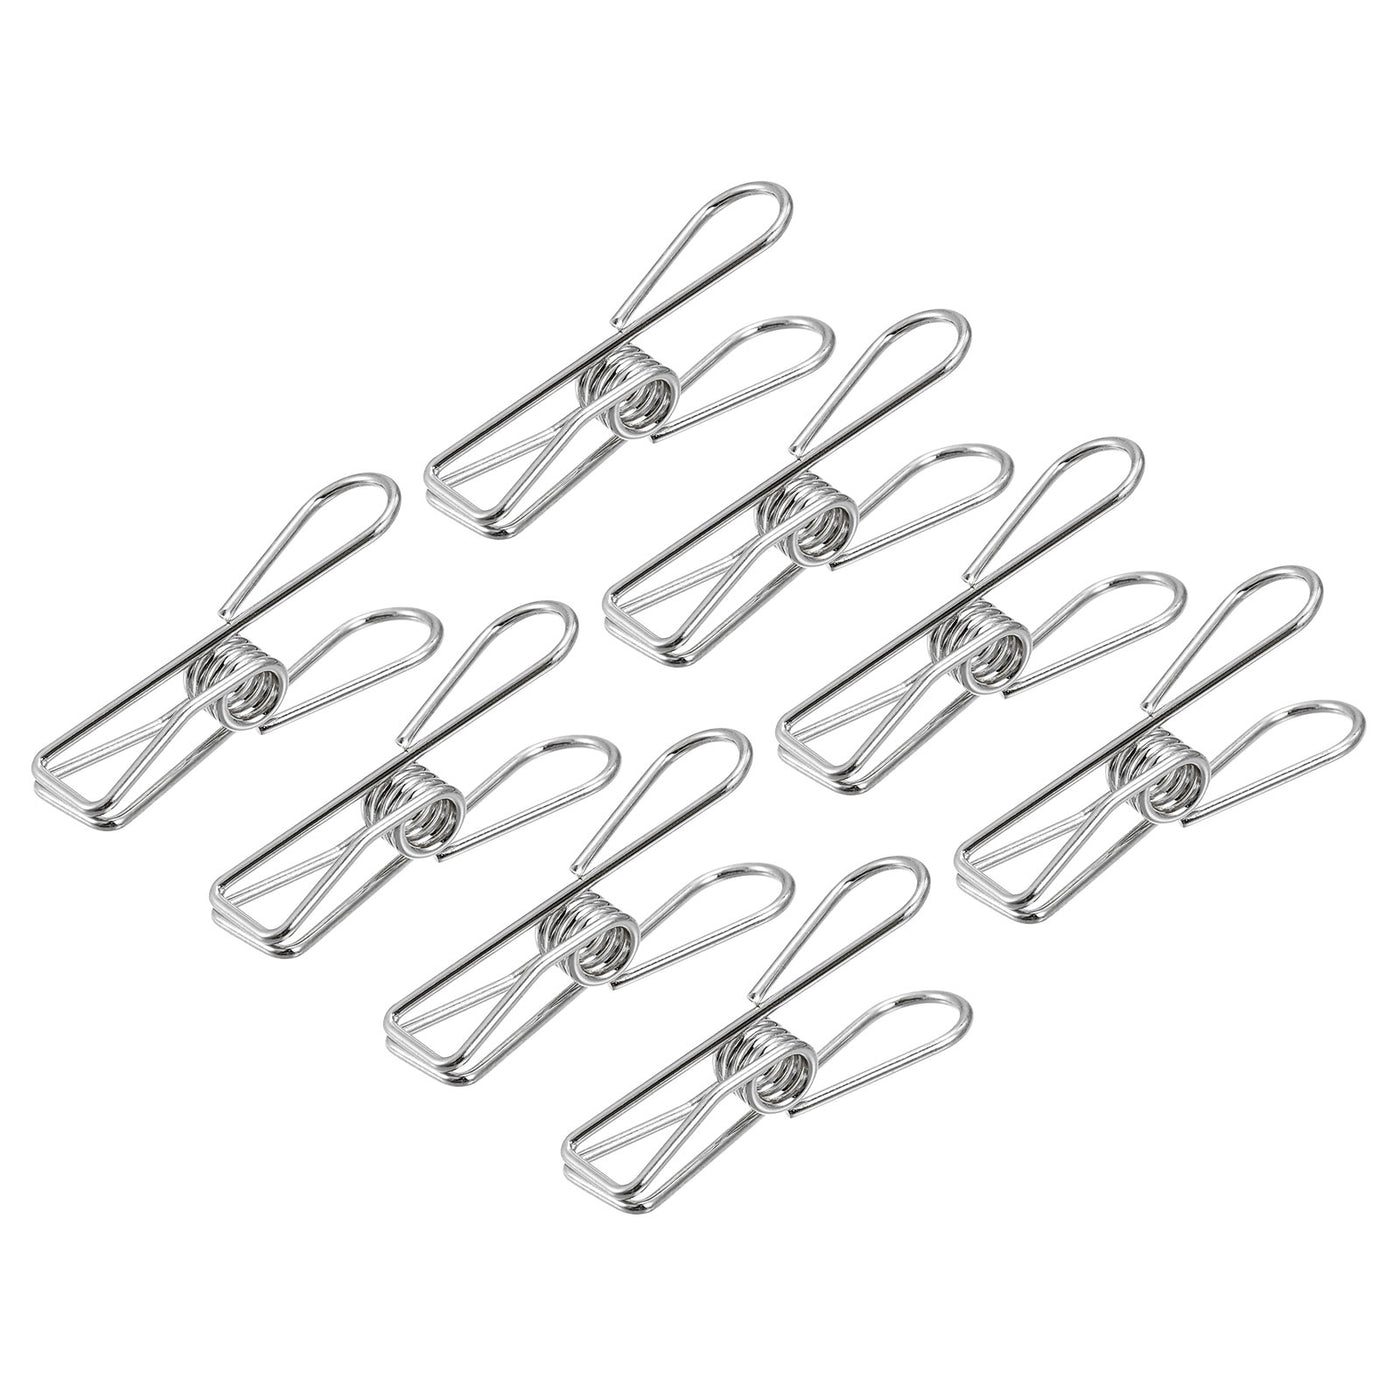 uxcell Uxcell Tablecloth Clips, 32mm Carbon Steel Clamps for Fixing Table Cloth, Silver 8 Pcs